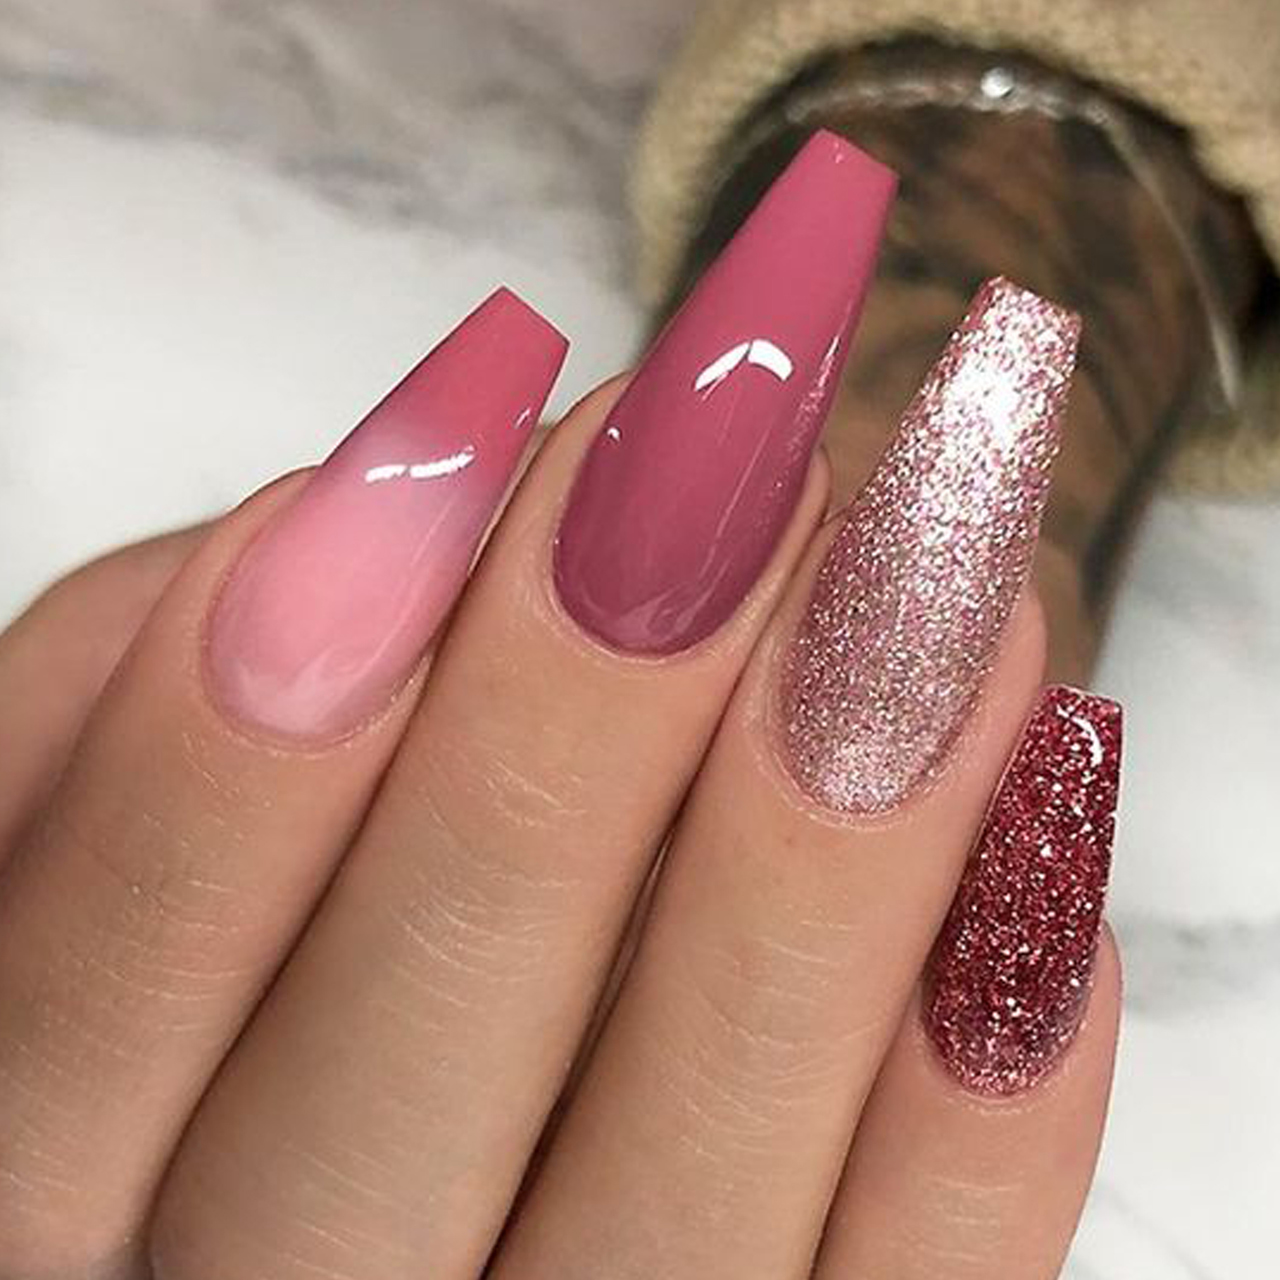 Ballerina nails. 2 75+ Hottest Looking Nail Shapes for Women - 60